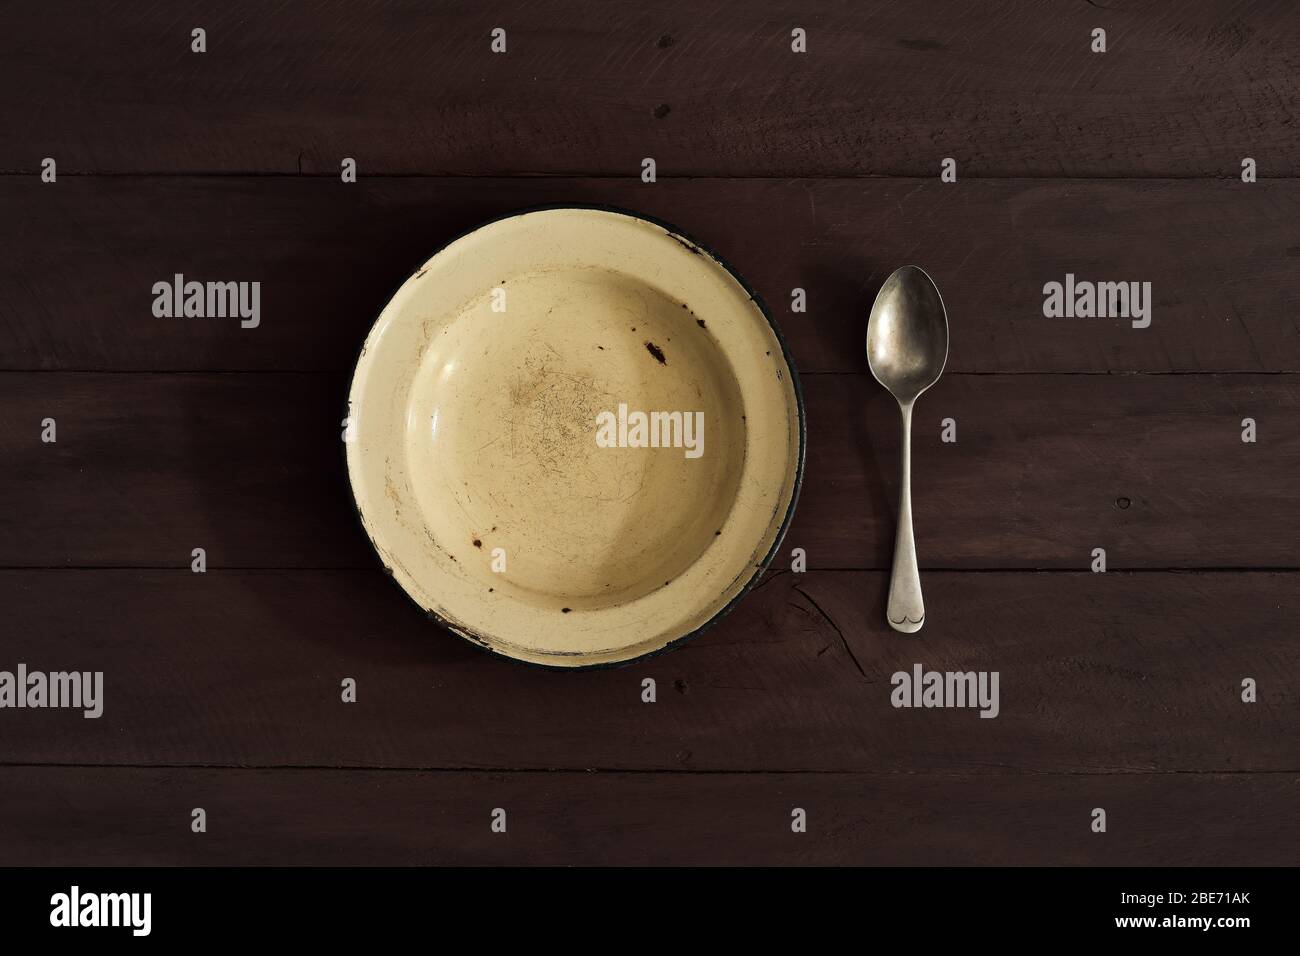 enamelled plate and spoon on wooden table Stock Photo